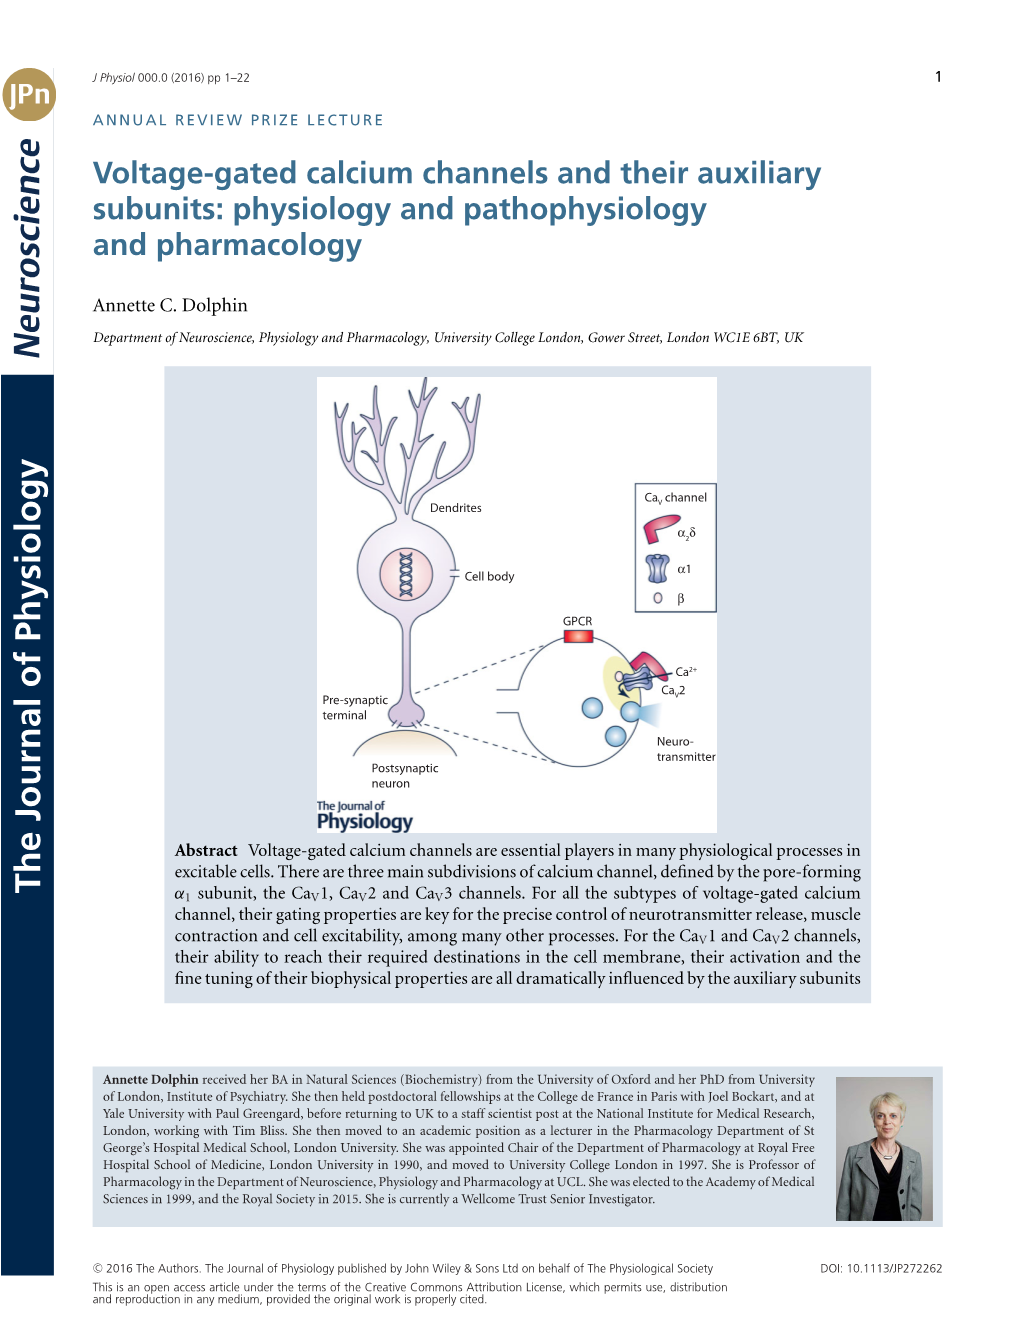 Gated Calcium Channels and Their Auxiliary Subunits: Physiology and Pathophysiology and Pharmacology